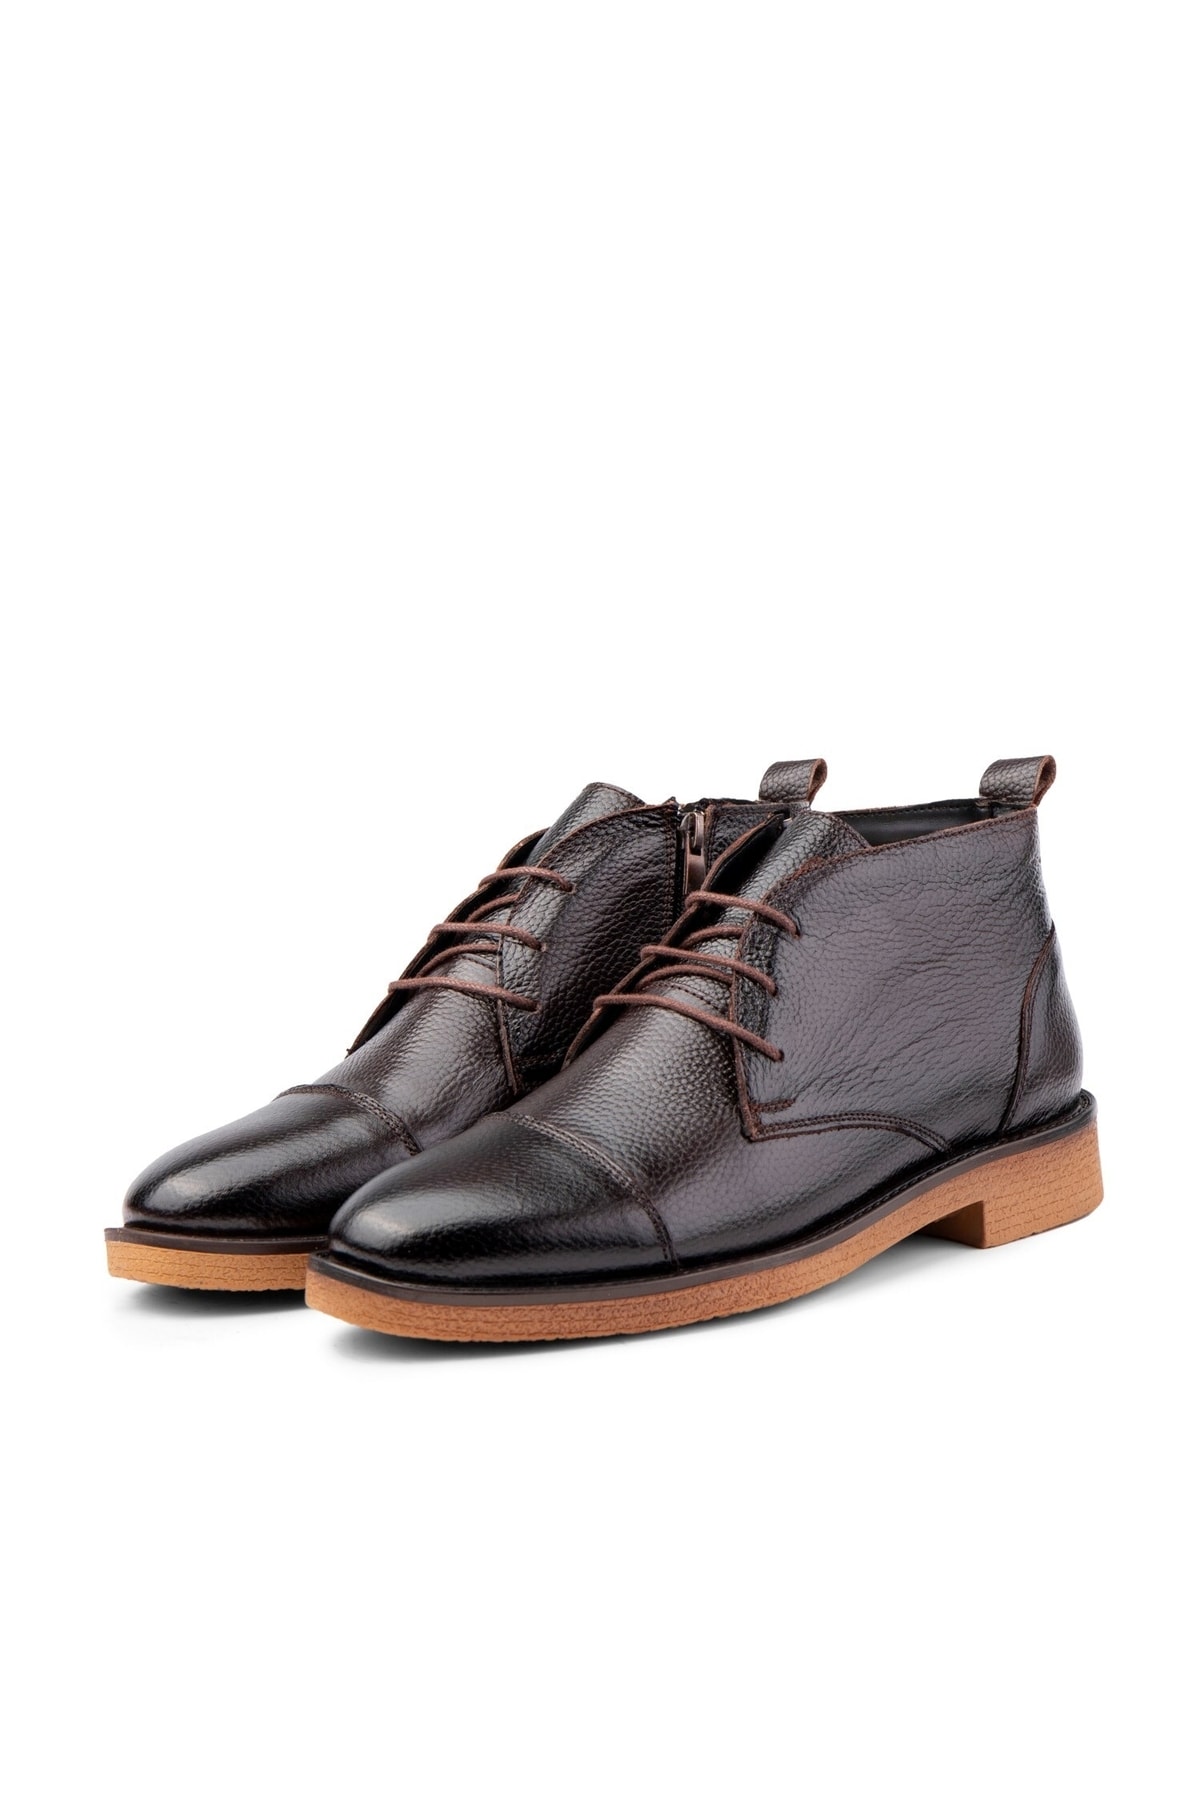 Levně Ducavelli Birmingham Genuine Leather Lace-Up Zippered Anti-Slip Sole Daily Boots Navy Blue.